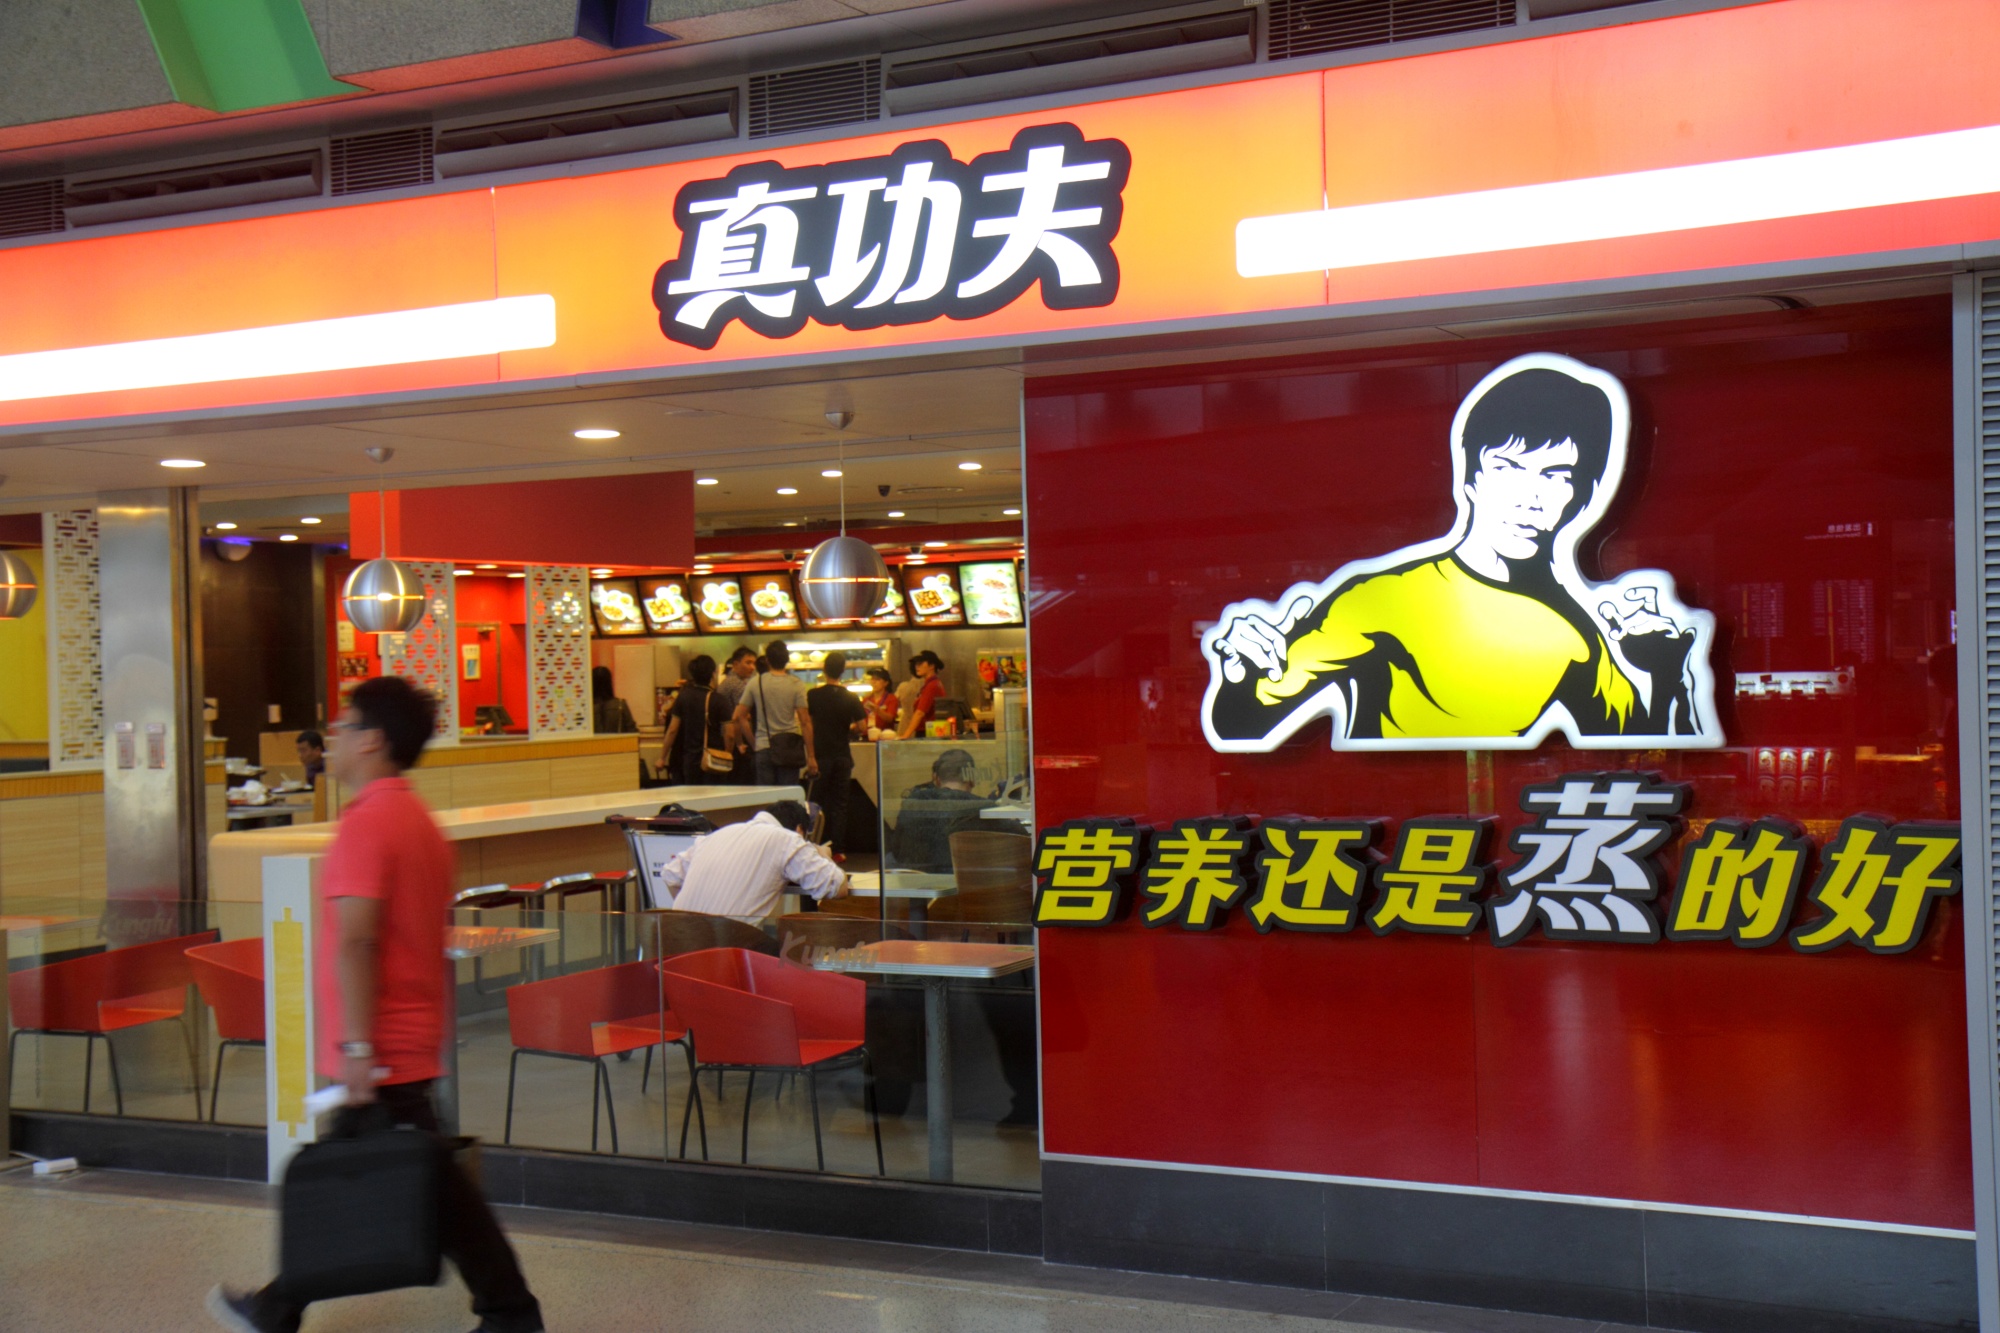 chinese fast food logo